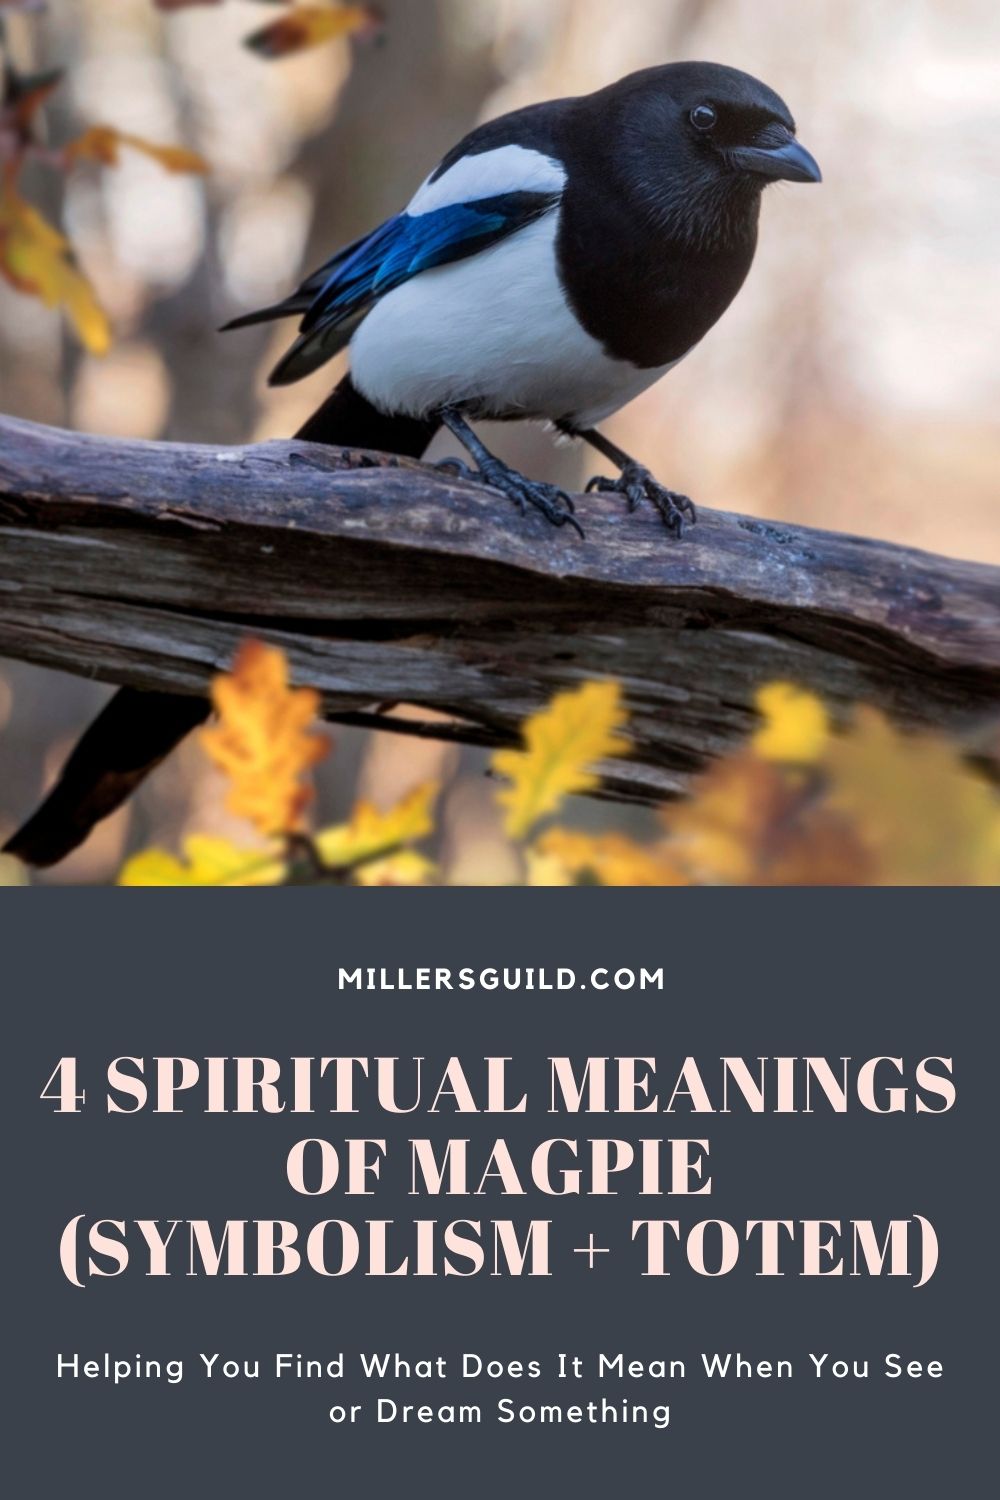 4 Spiritual Meanings of Magpie (Symbolism + Totem) 1